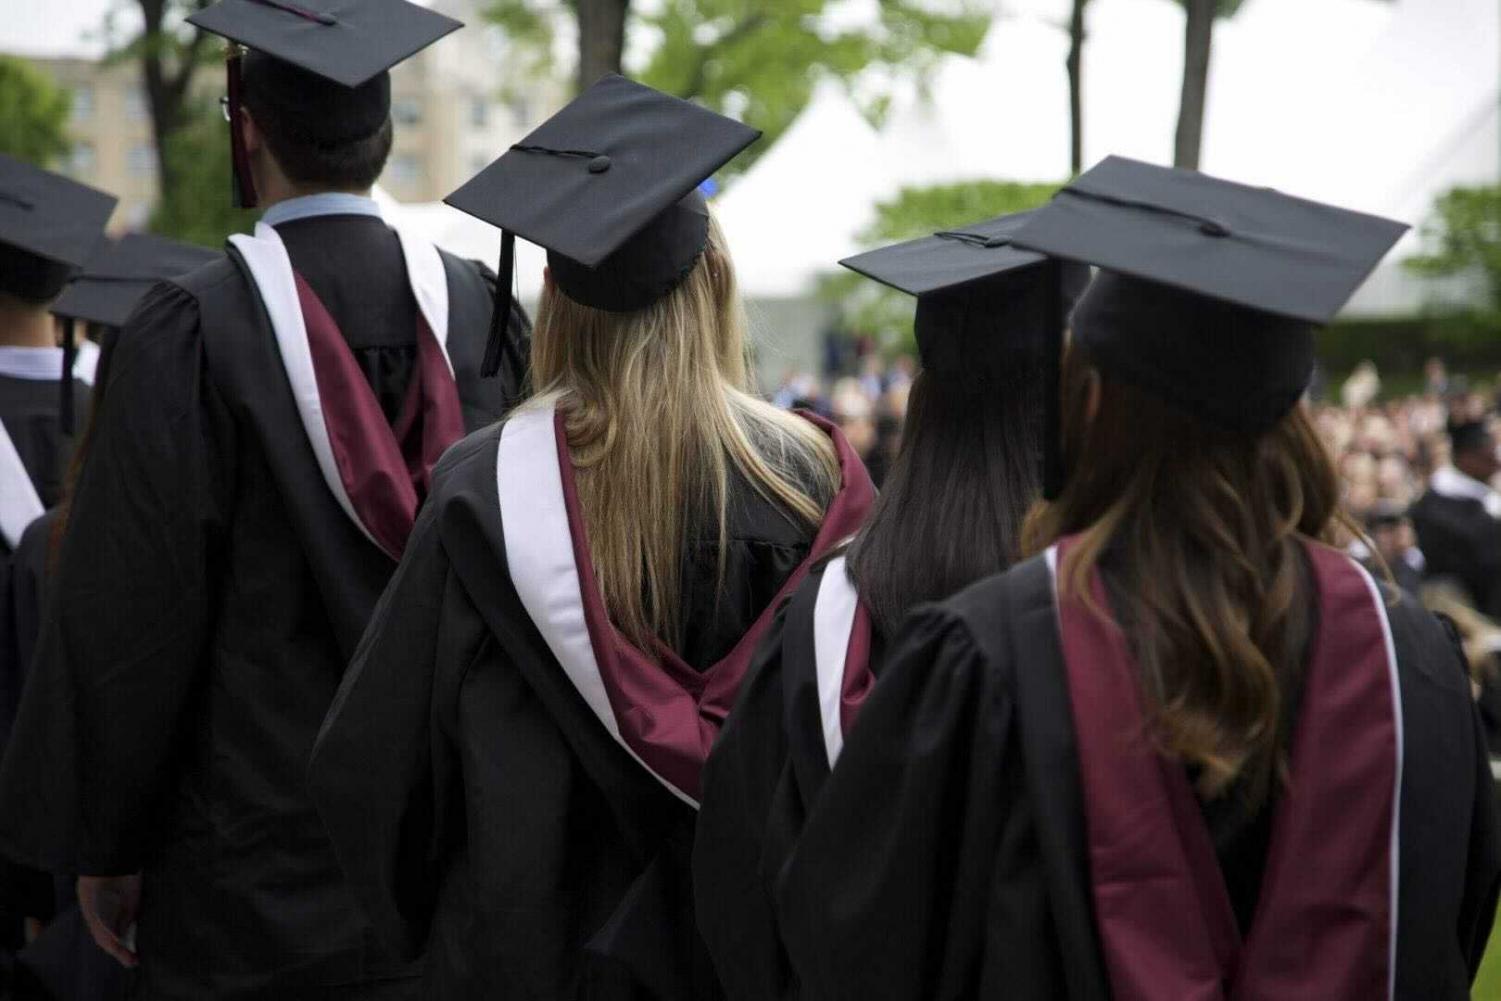 UPDATED Fordham Confirms Hybrid Graduation Commencement for the Class